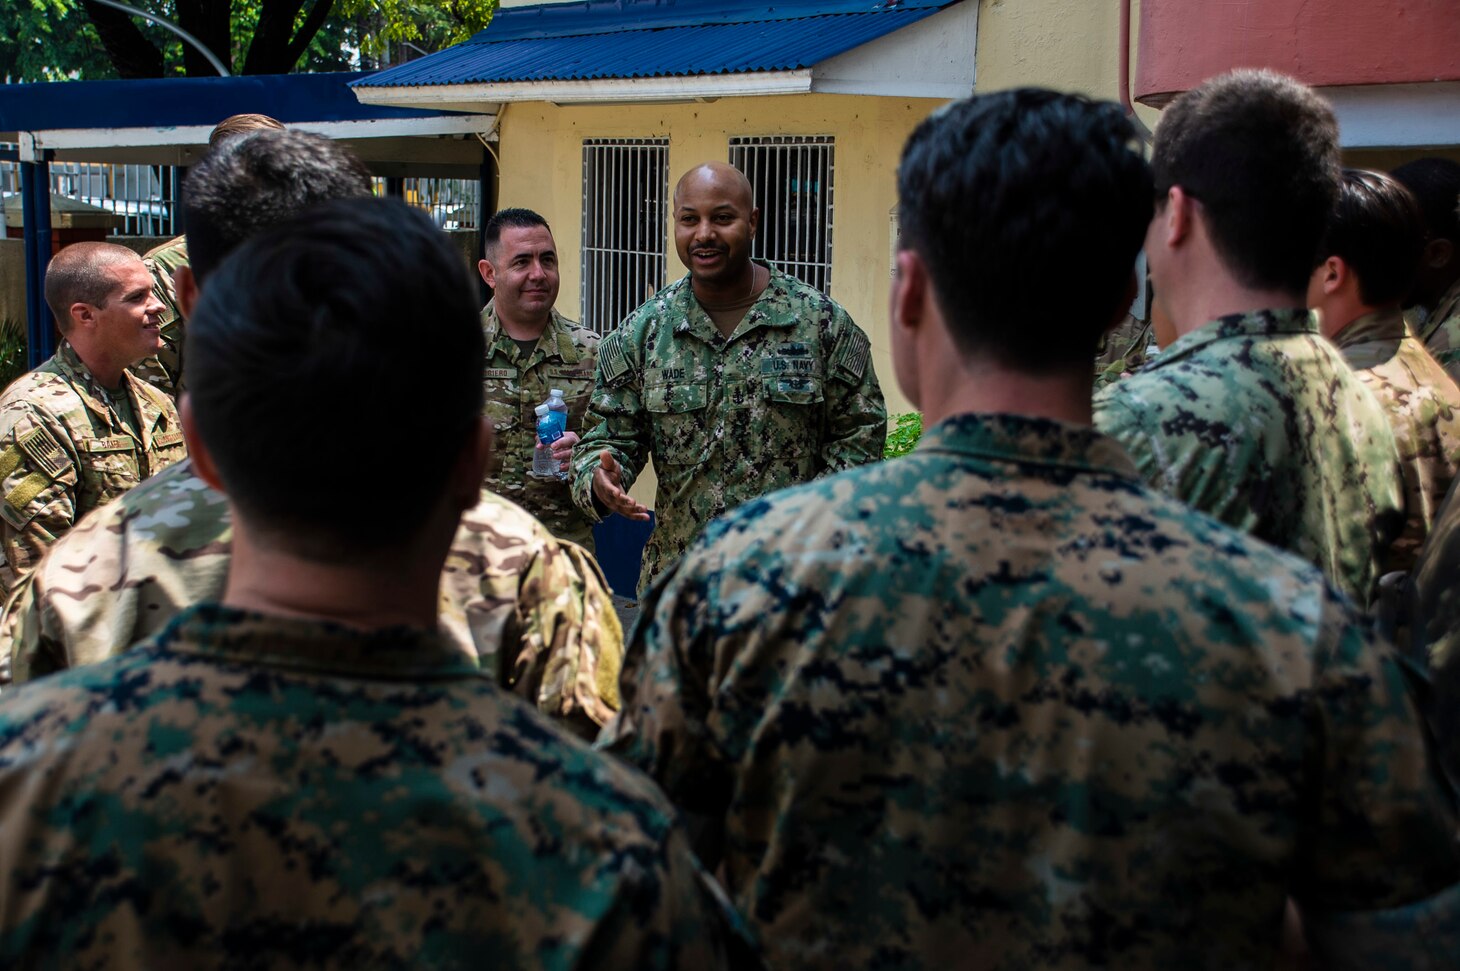 MANILA, Philippines (Aug. 19, 2019) Senior Chief Gunner's Mate Deonta Wade, assigned to Destroyer Squadron 7, speaks with participants during Southeast Asia Cooperation and Training (SEACAT) 2019 at the Philippine Coast Guard Headquarters in Manila. This year marks the 18th iteration of SEACAT, which is designed to enhance maritime security skills by highlighting the value of information sharing and multilateral coordination.